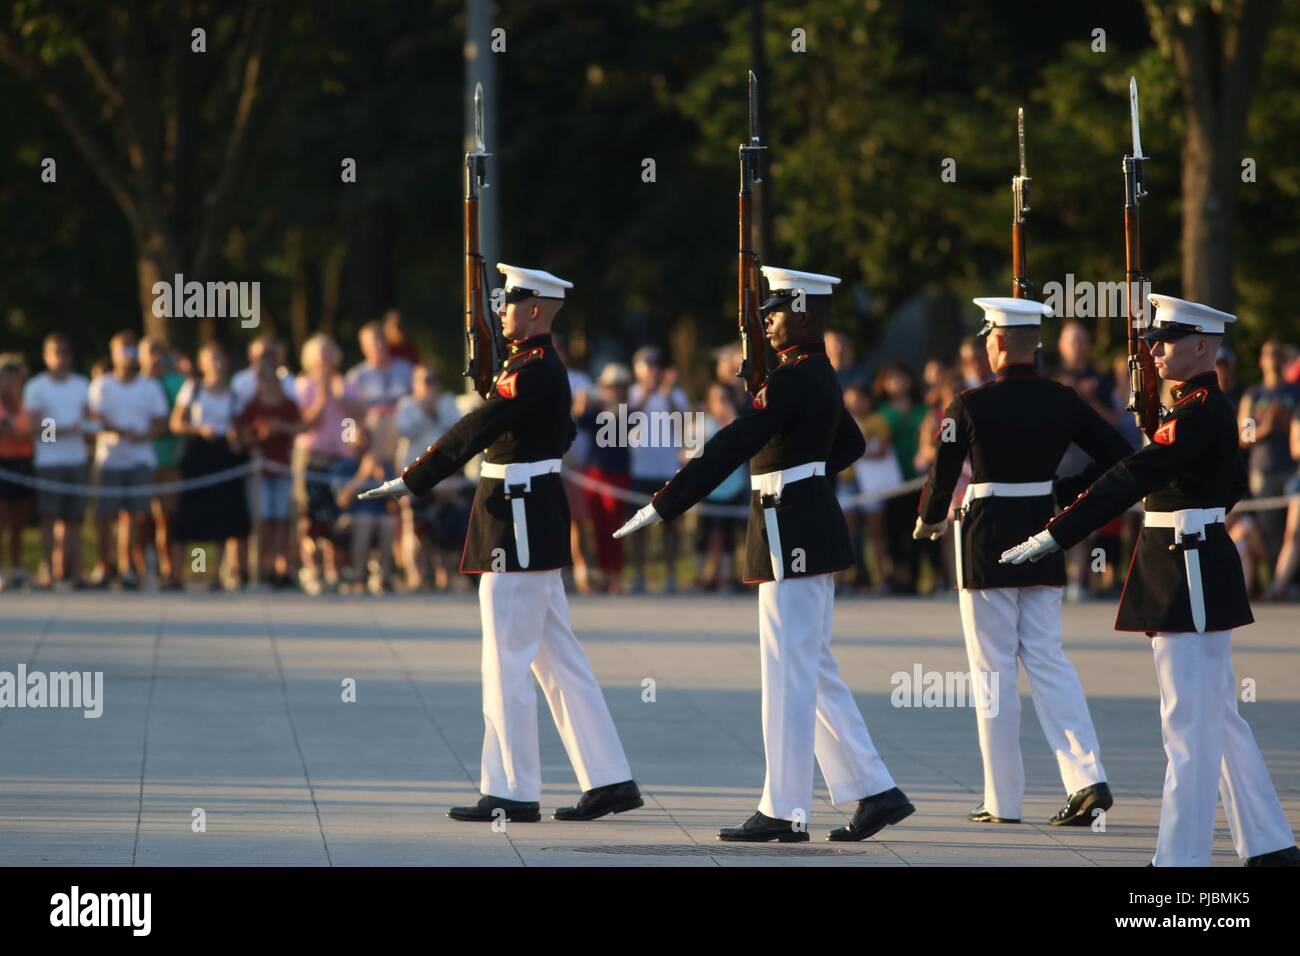 Marines with the U.S. Marine Corps Silent Drill Platoon execute precision rifle drill movements during a Tuesday Sunset Parade at the Lincoln Memorial, Washington D.C., July 10, 2018. The guest of honor for the parade was the former Vice President of the U.S., Joe Biden, and the hosting official was the Staff Judge Advocate to the Commandant of the Marine Corps, Maj. Gen. John R. Ewers Jr. Stock Photo